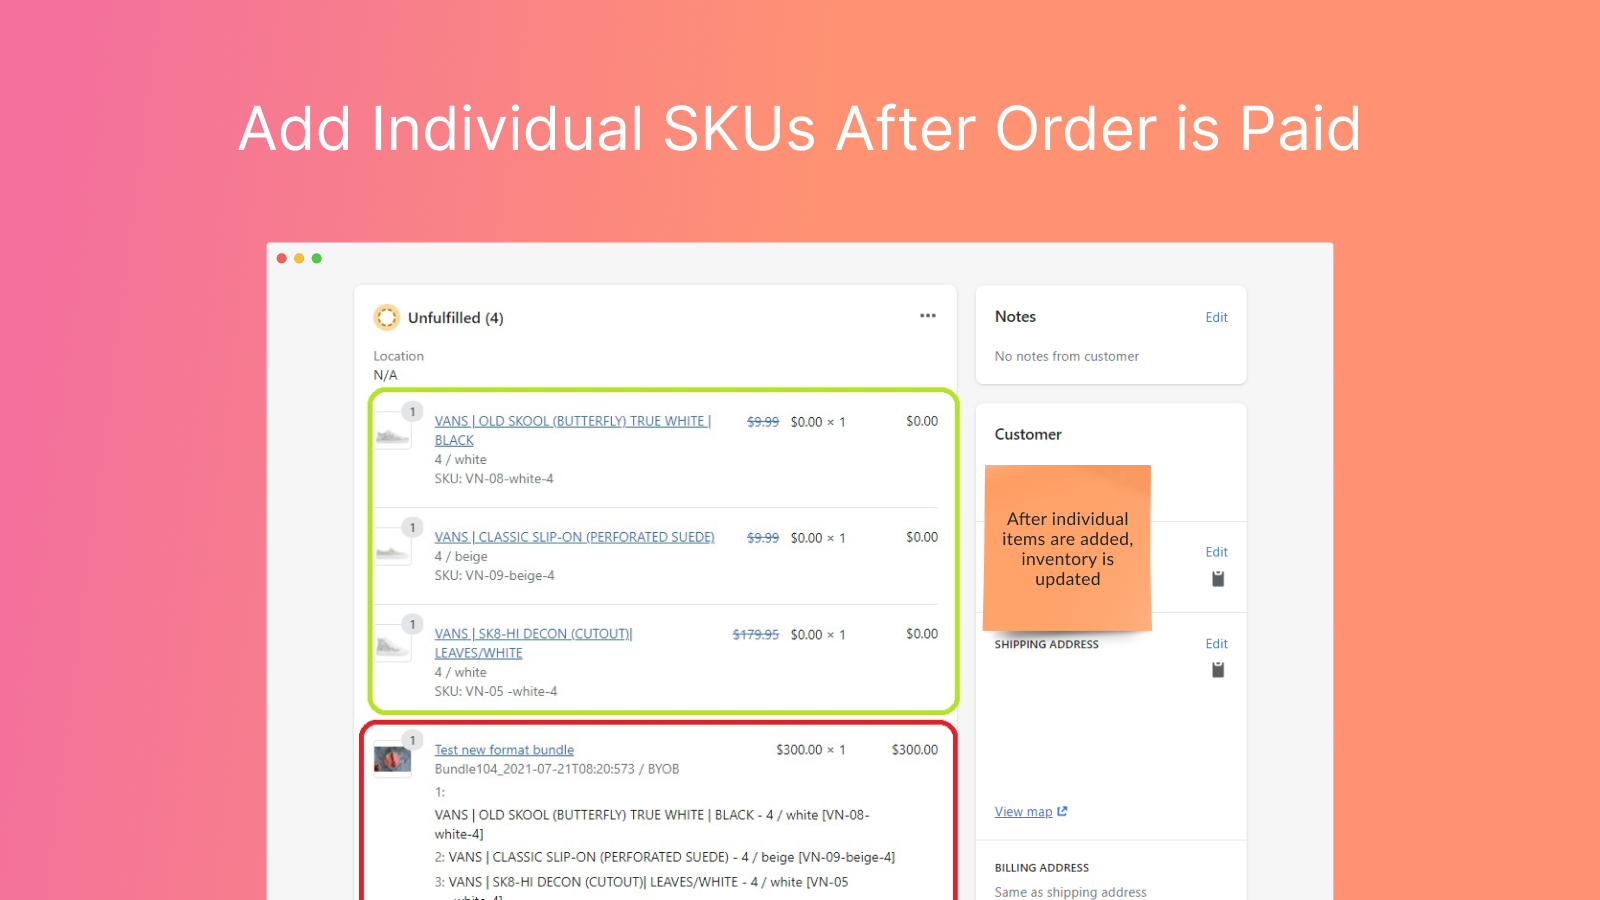 Break down to individual SKUs with the cart transformation API